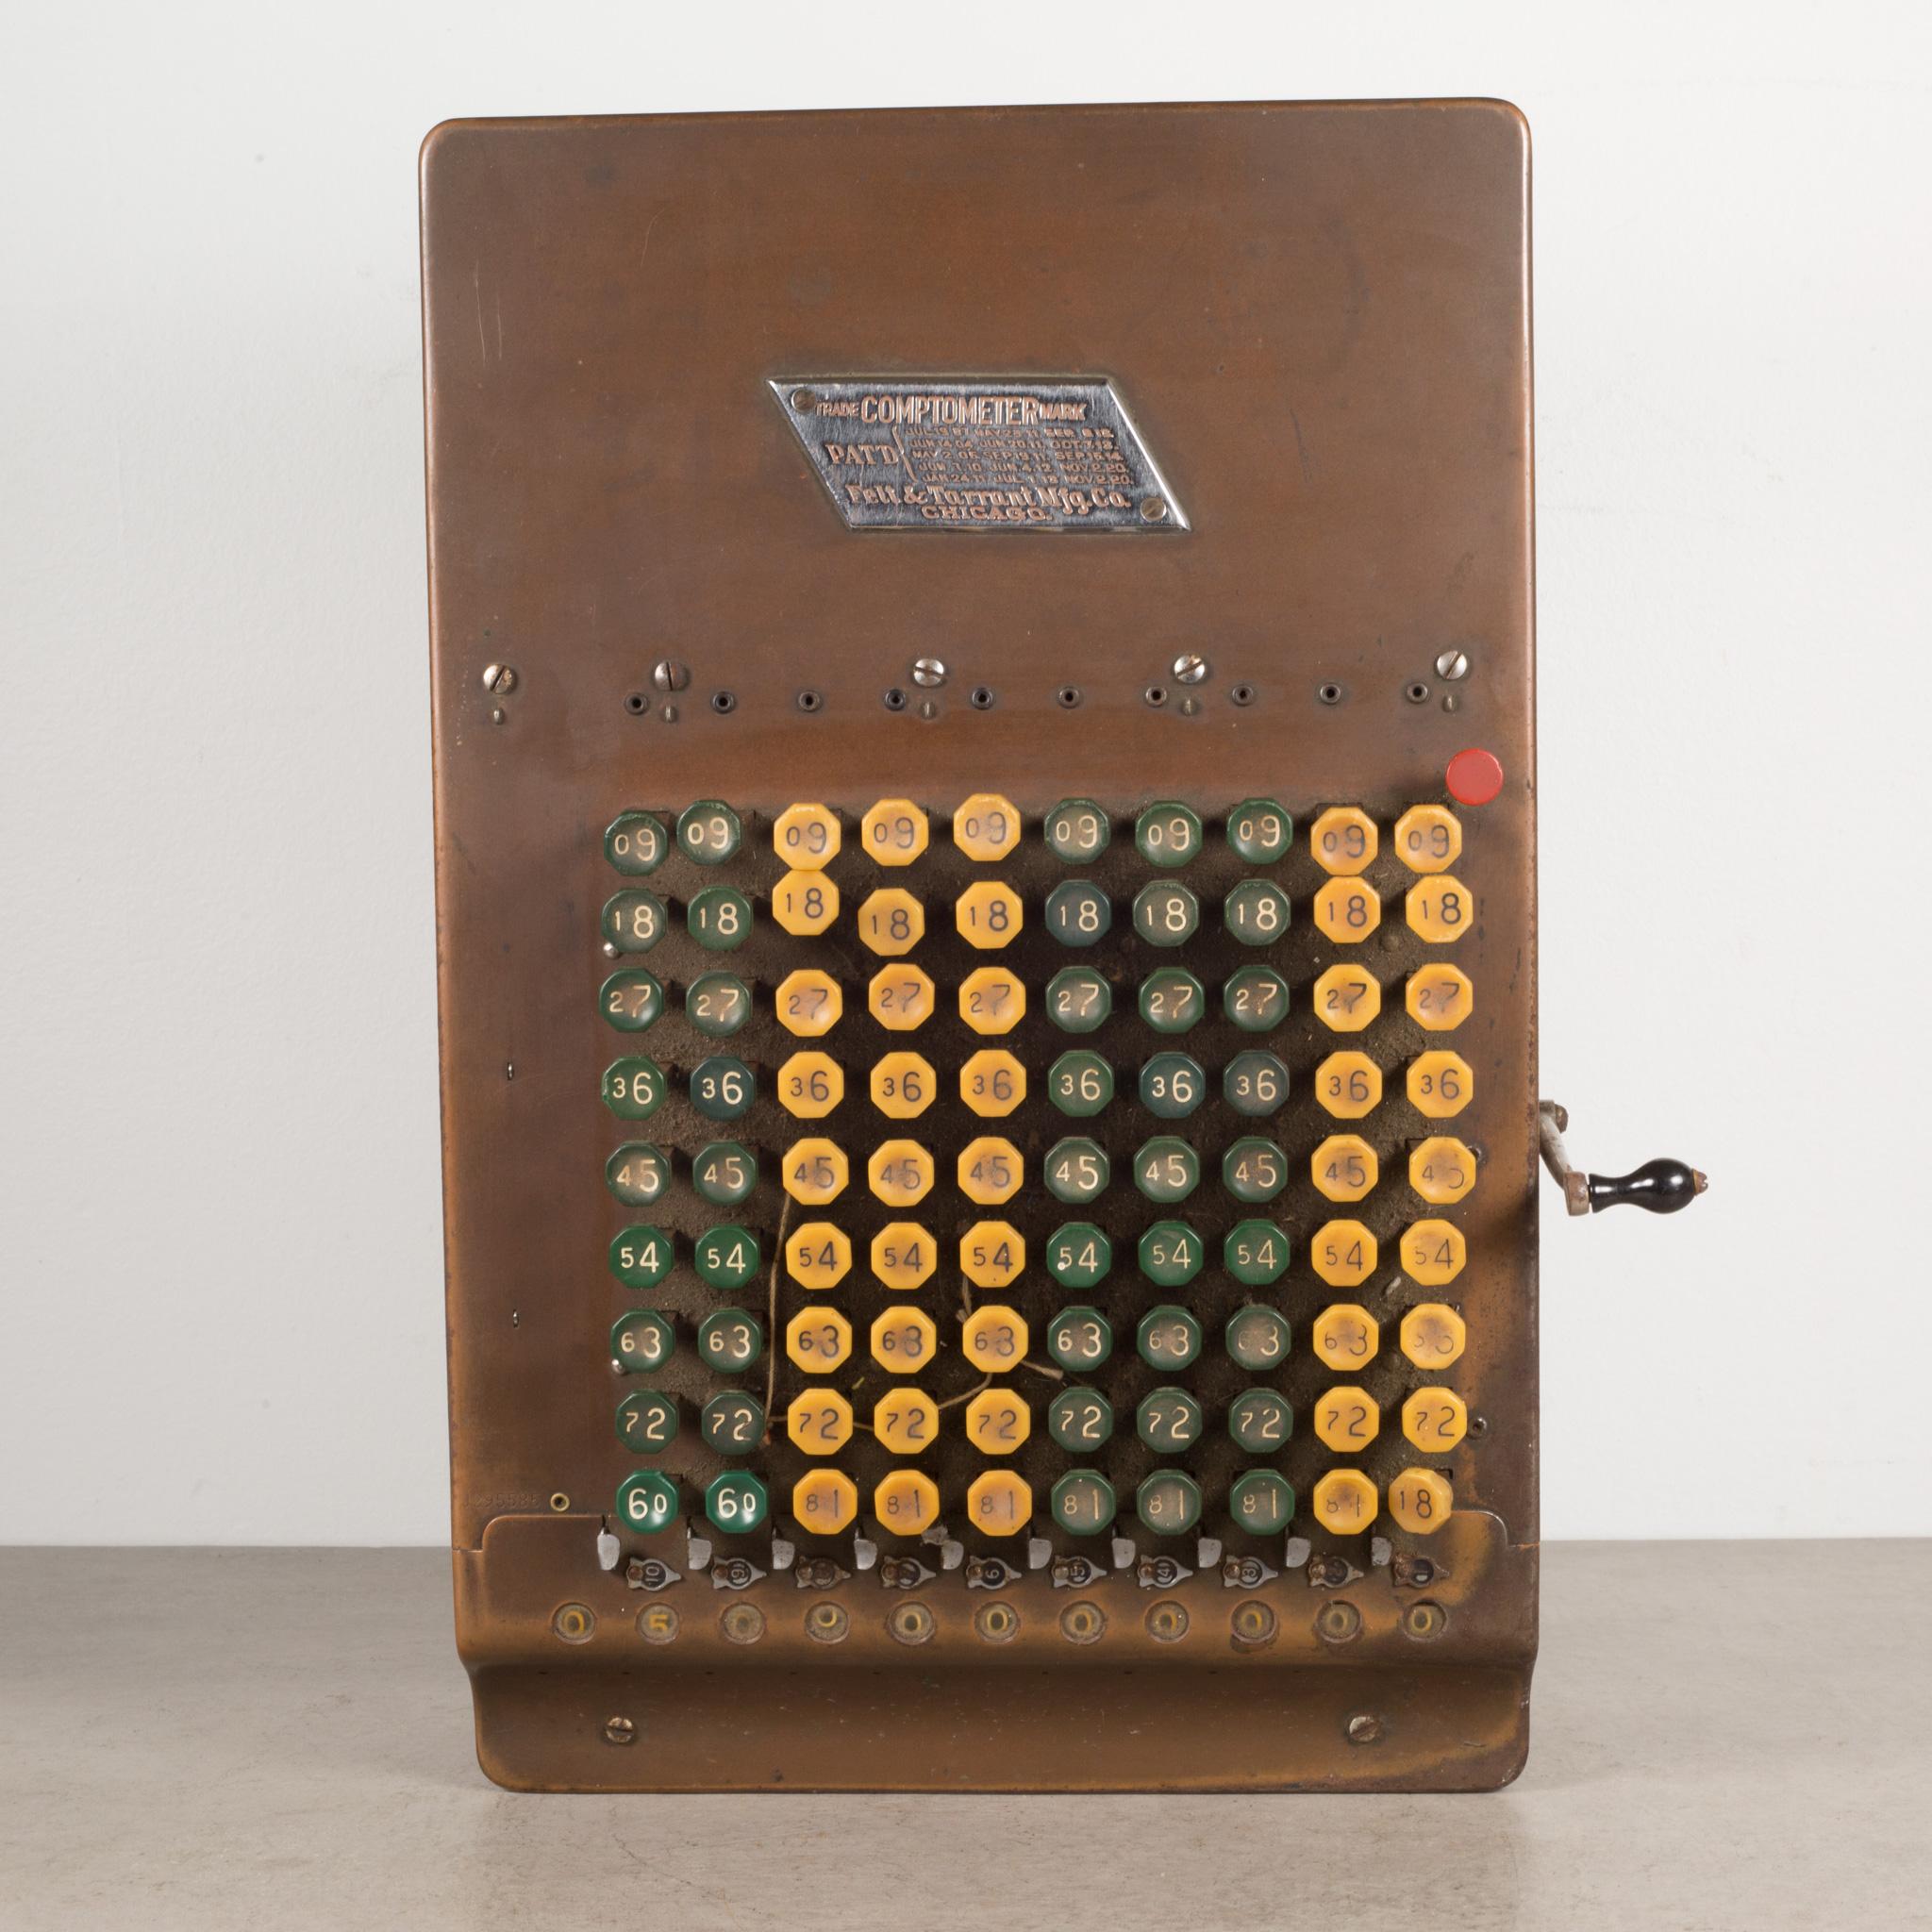 About
An antique Comptometer copper and tin adding machine with yellow and green Bakelite buttons and original metal name tag, manufactures tag and side decorations. The lever somewhat pulls working the inner mechanisms. The piece has retained its